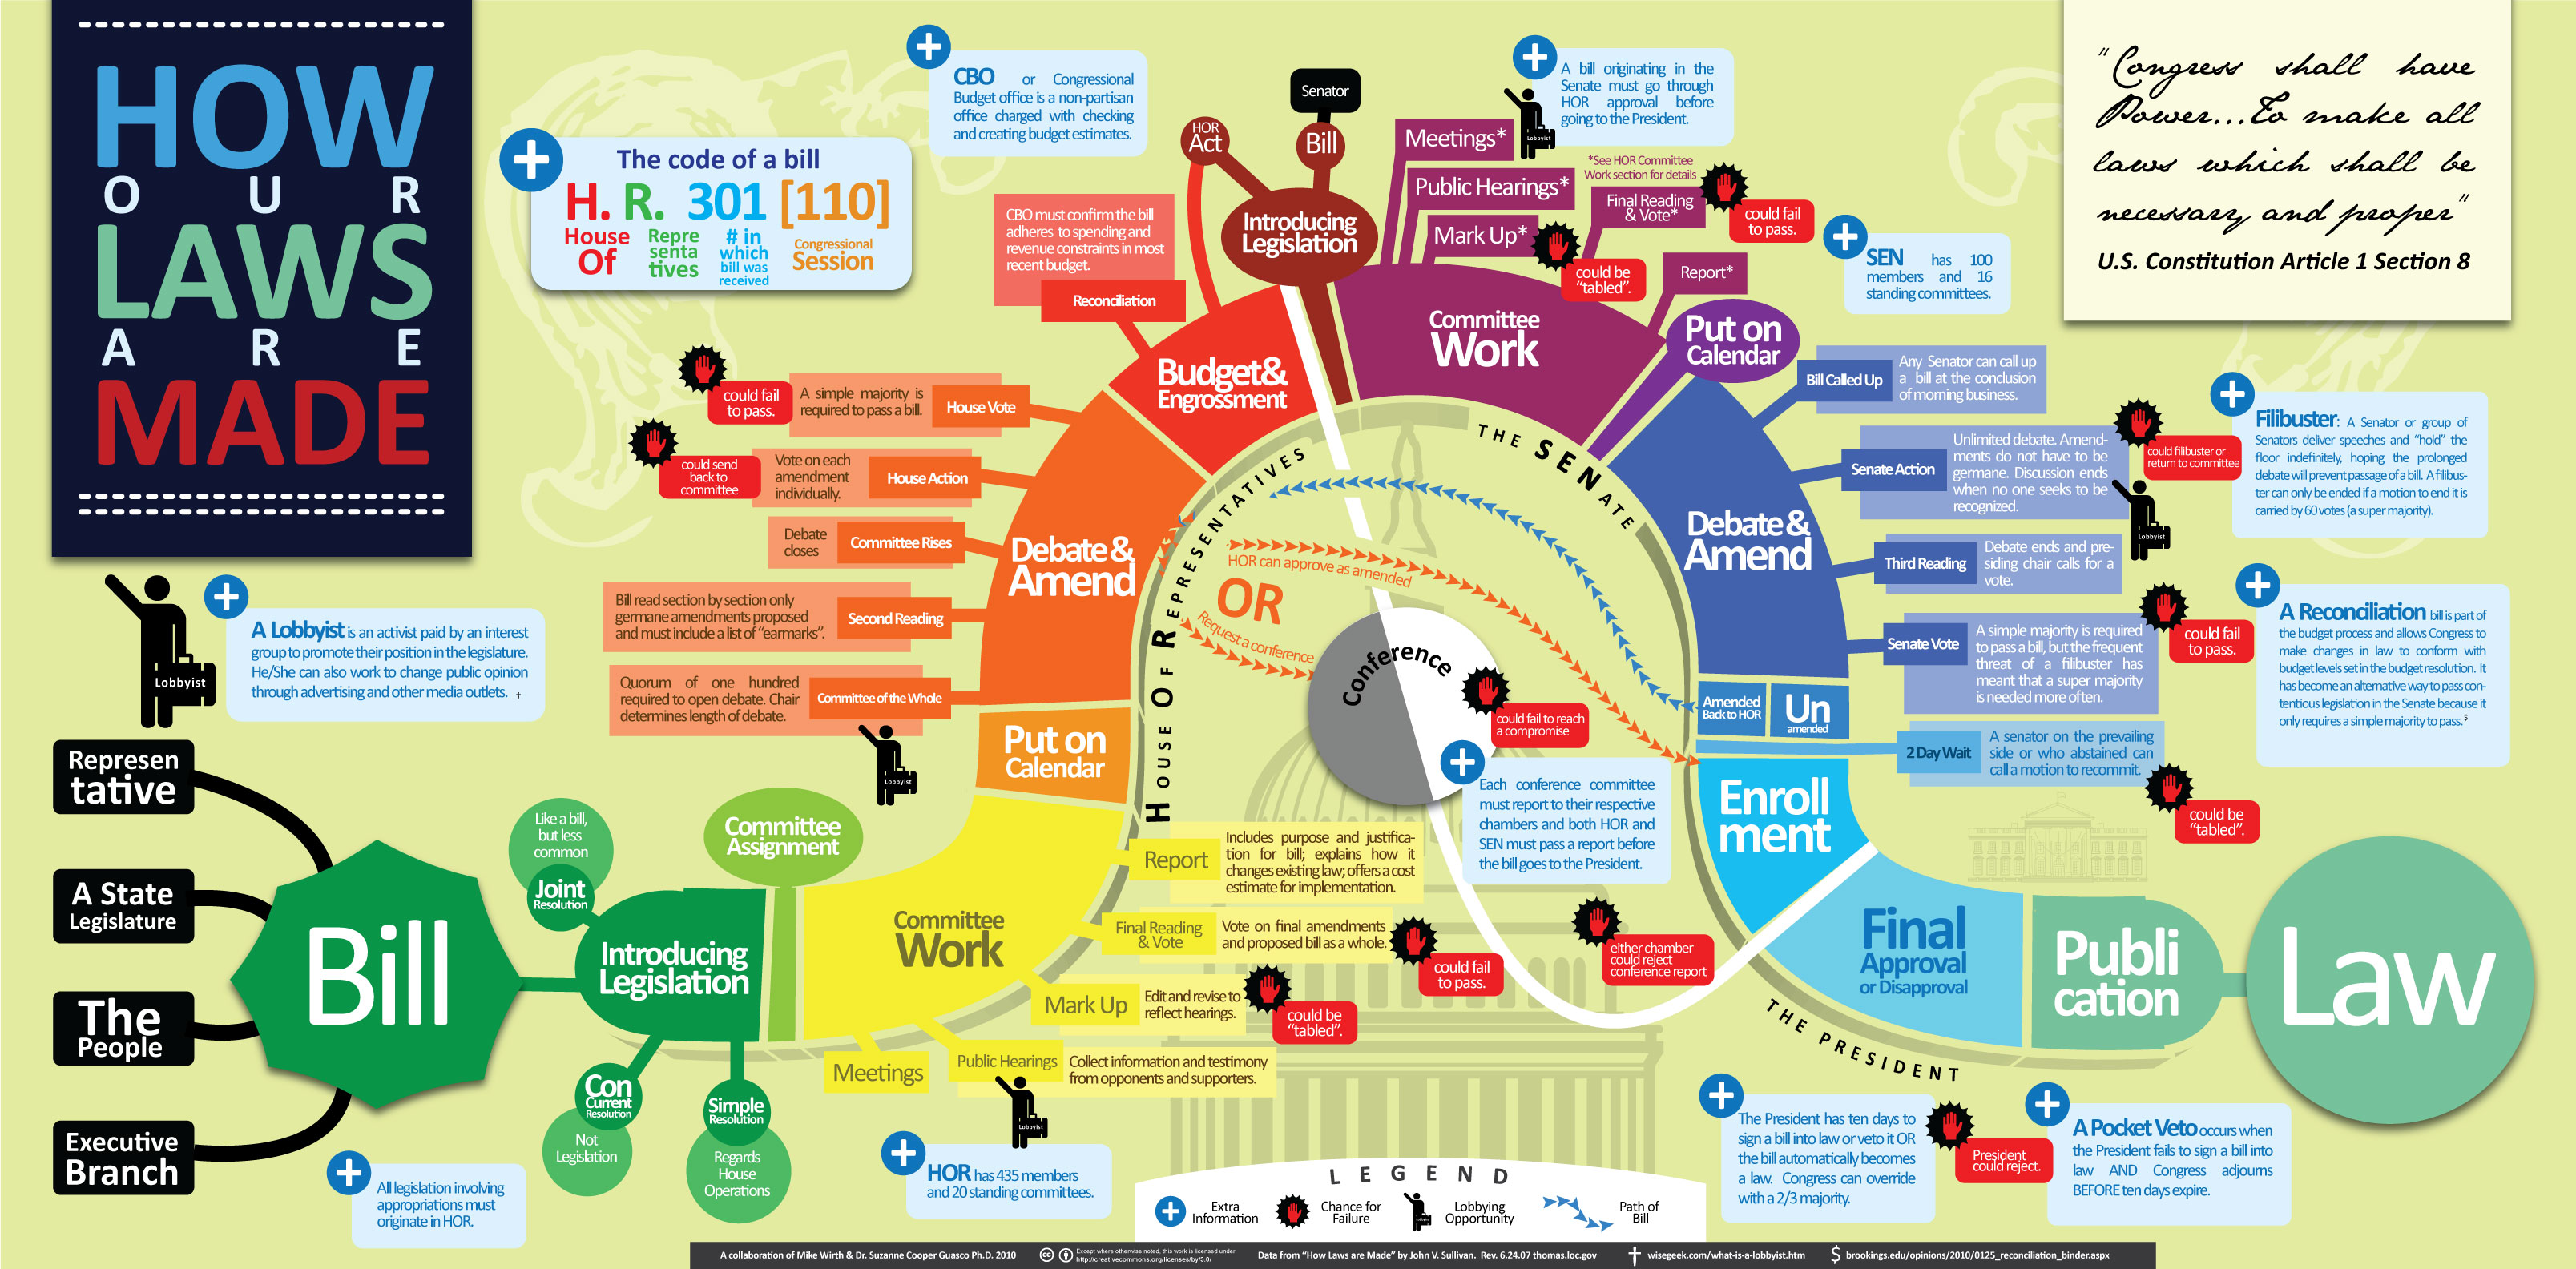 Infographic: How Our Laws are Made. Data from "How Laws are Made" by John V. Sullivan. Creative Commons License. 2010.